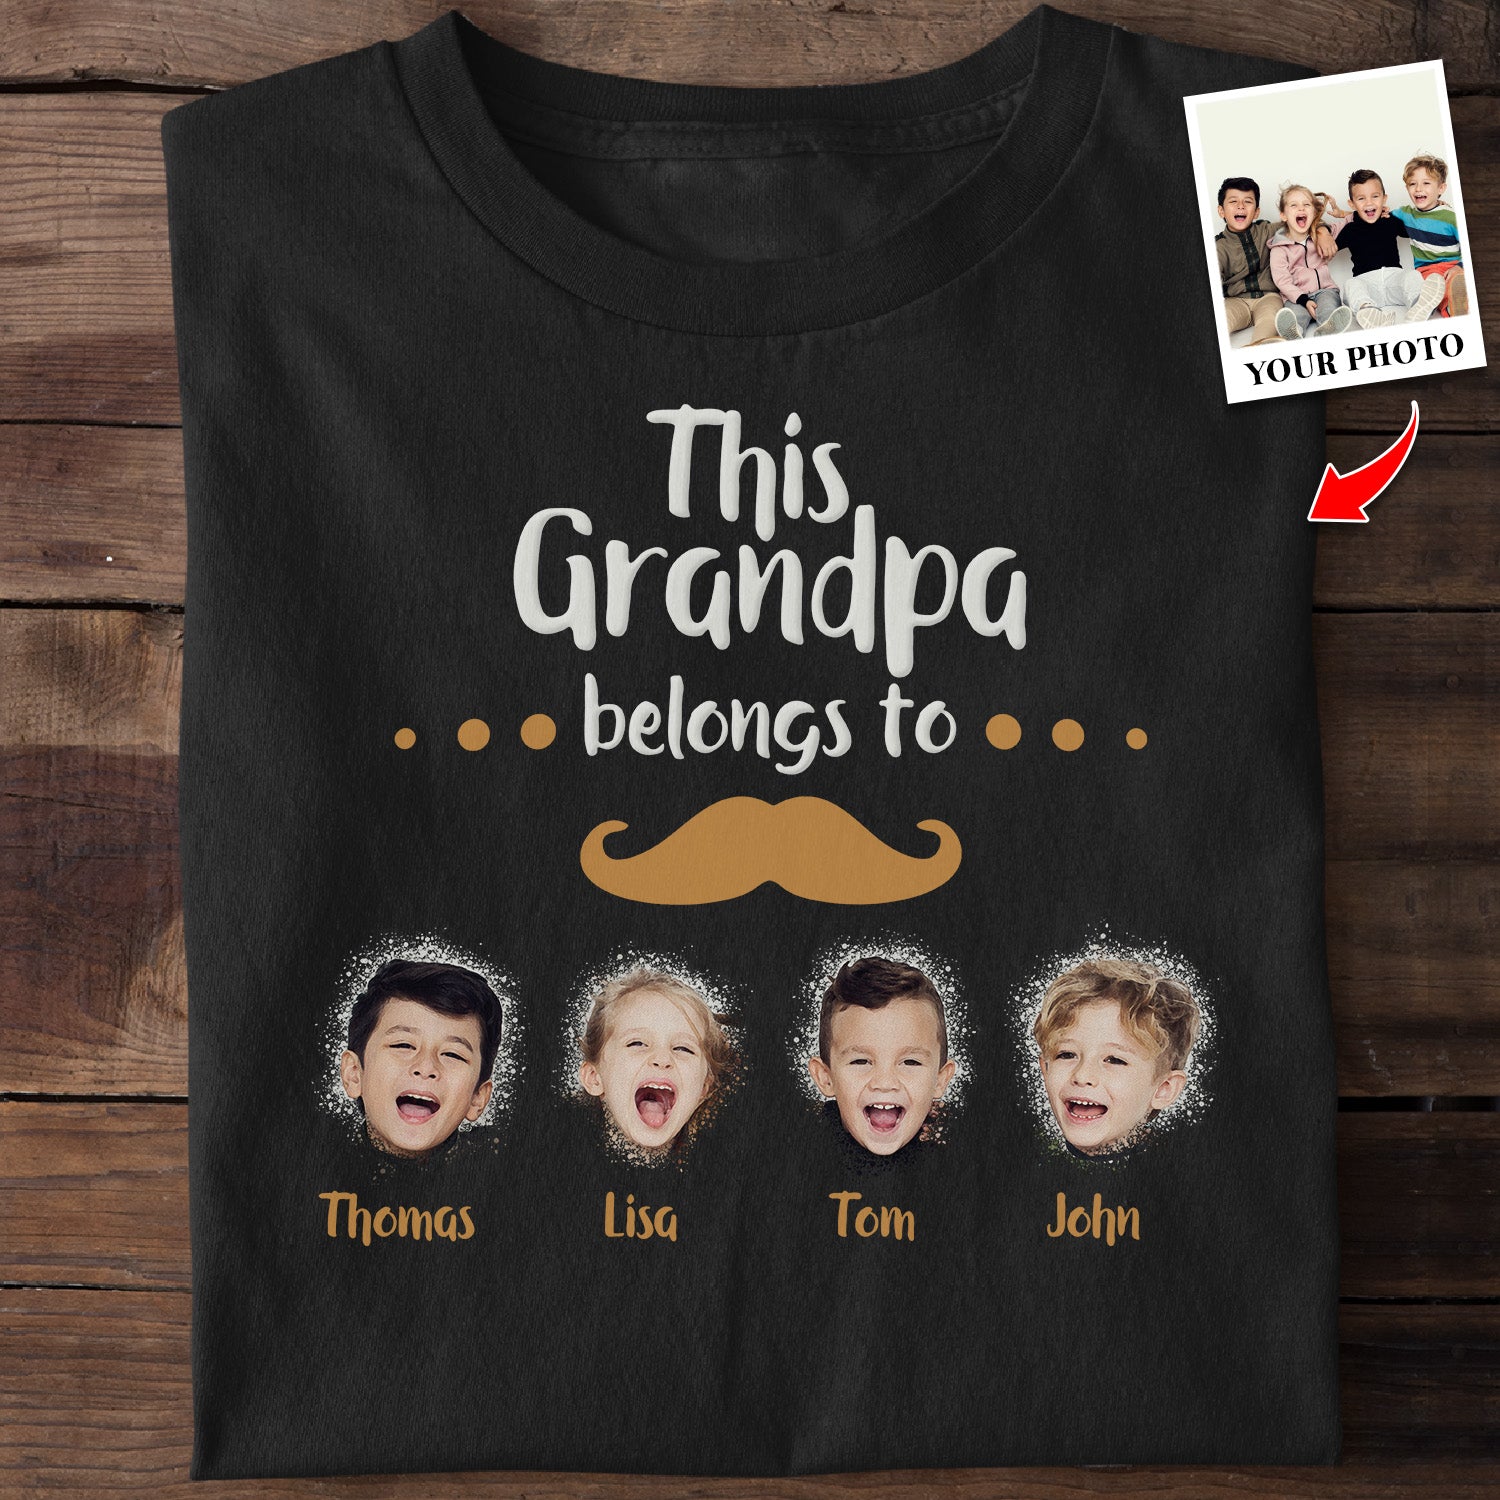 Custom Portrait From Photo, Grandpa Shirt With Grandkid's Name, This Granpa Belongs To, Personalized Name And Text, Tshirt